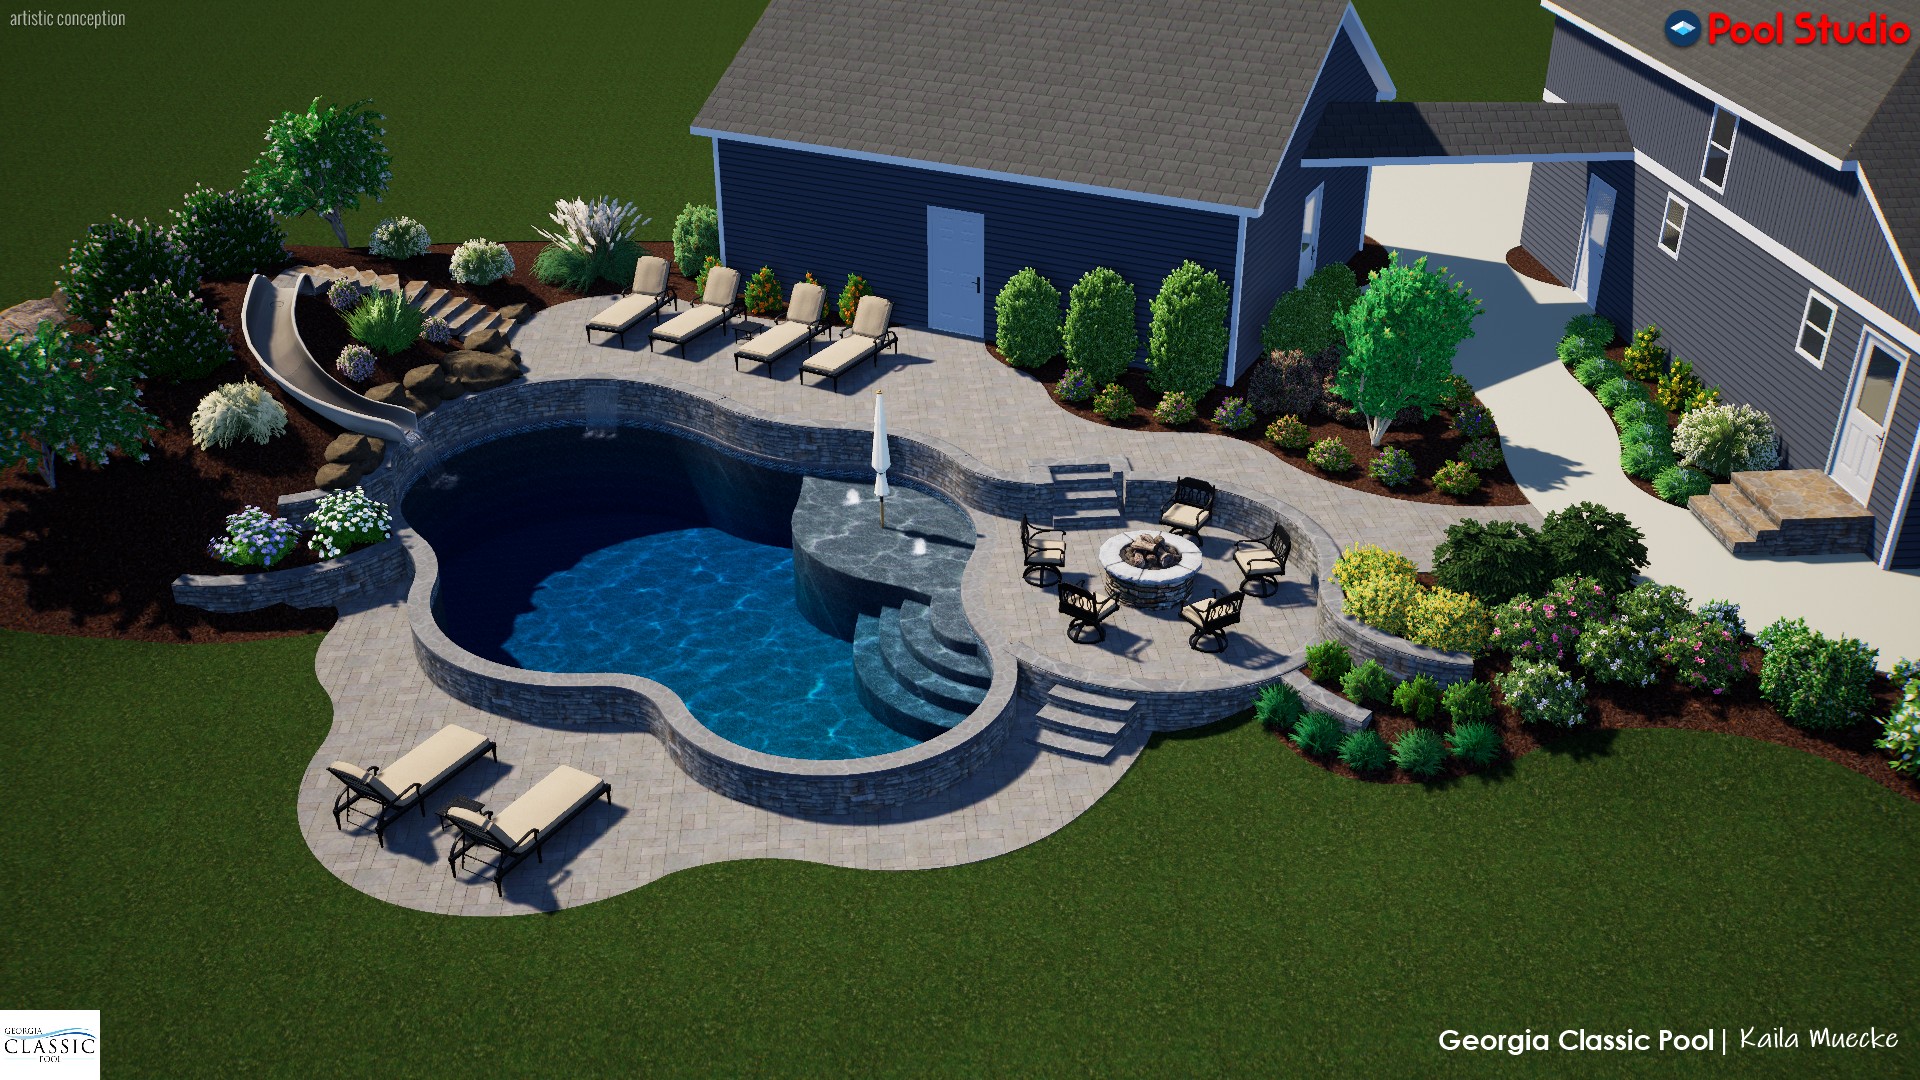 A thrilling 3D swimming pool design featuring a slide and a cozy firepit, offering the perfect balance of excitement and relaxation.